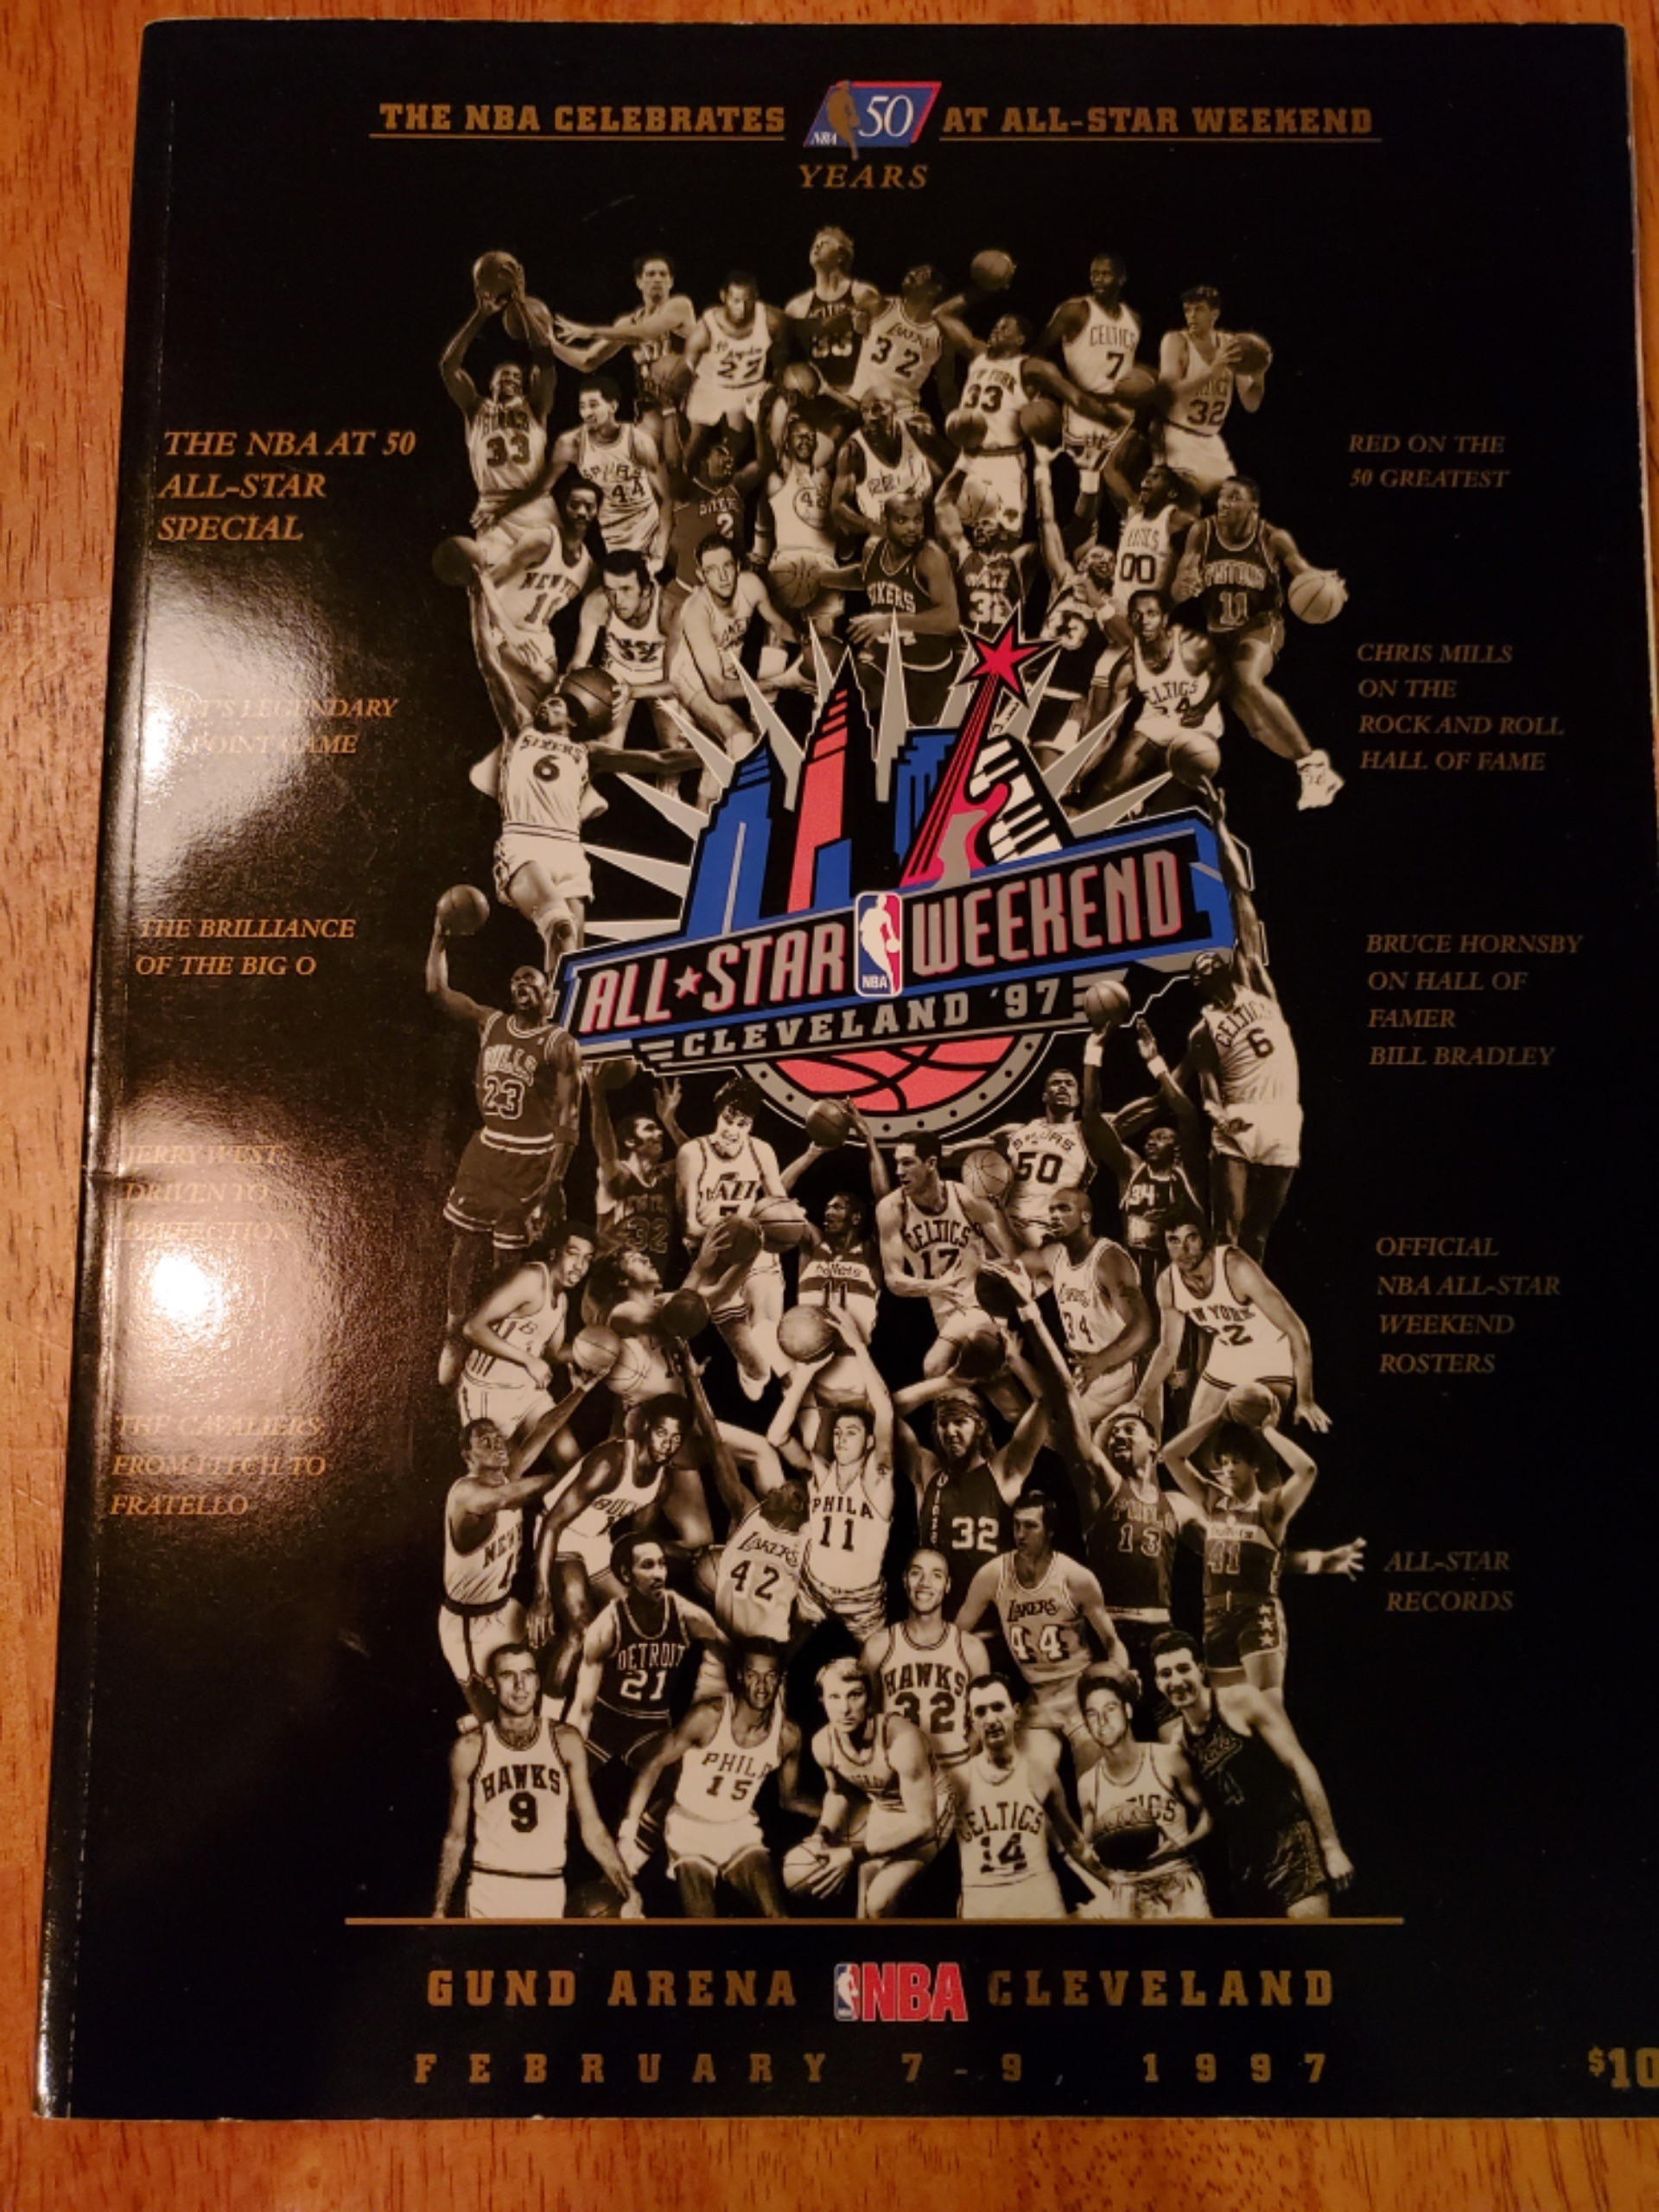 History of the NBA All-Star Game in Cleveland